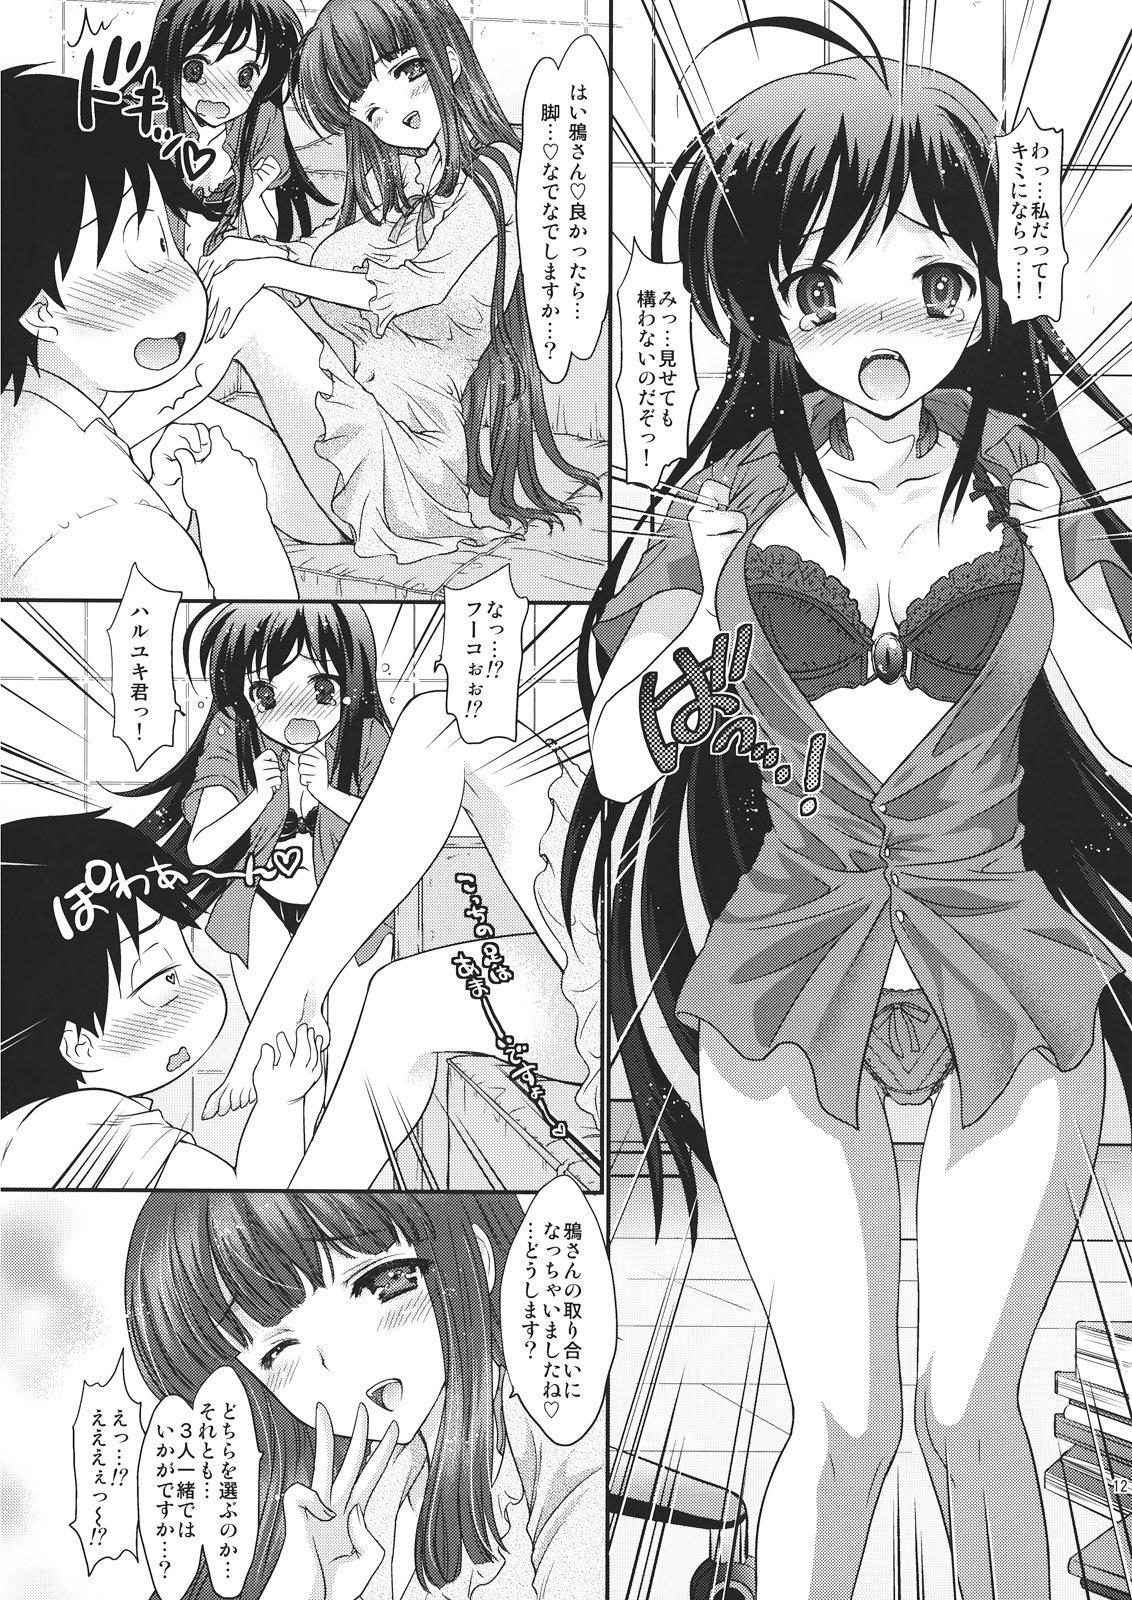 Latinas Double Accel - Accel world Amature Porn - Page 12